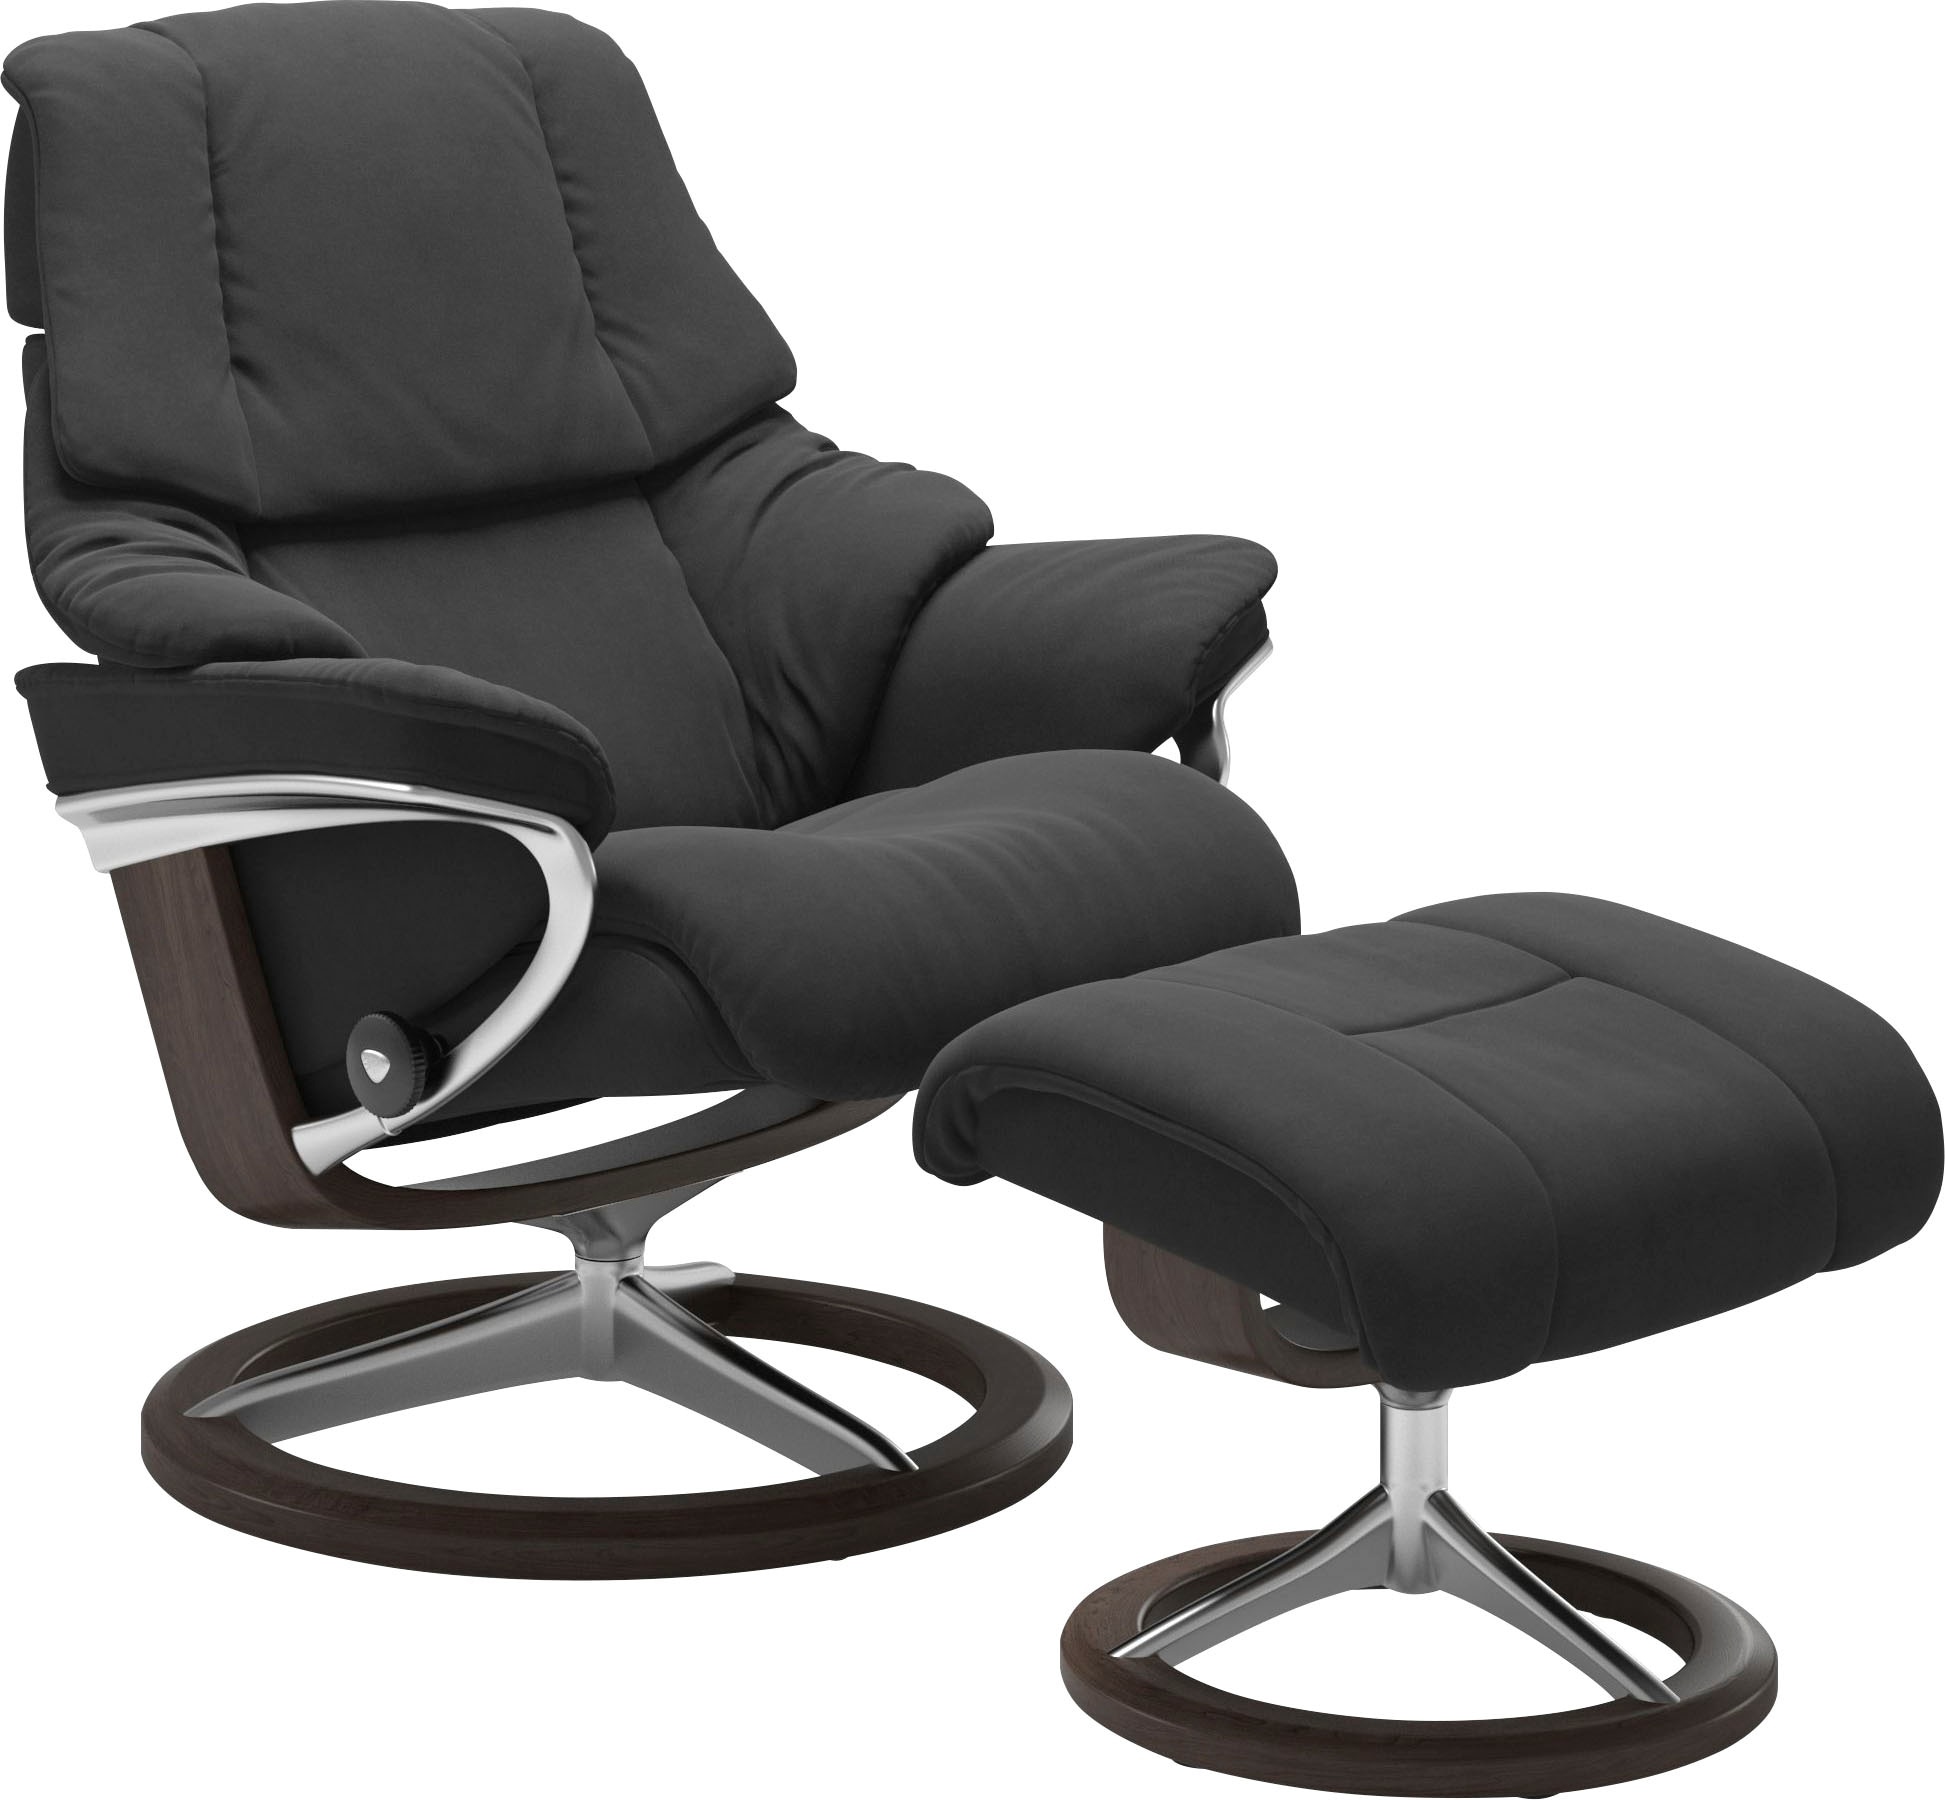 Relaxsessel STRESSLESS "Reno" Sessel Gr. Microfaser DINAMICA, Signature Base Wenge, Relaxfunktion-Drehfunktion-PlusTMSystem-Gleitsystem-BalanceAdaptTM, B/H/T: 79 cm x 99 cm x 75 cm, grau (charcoal dinamica) Lesesessel und Relaxsessel